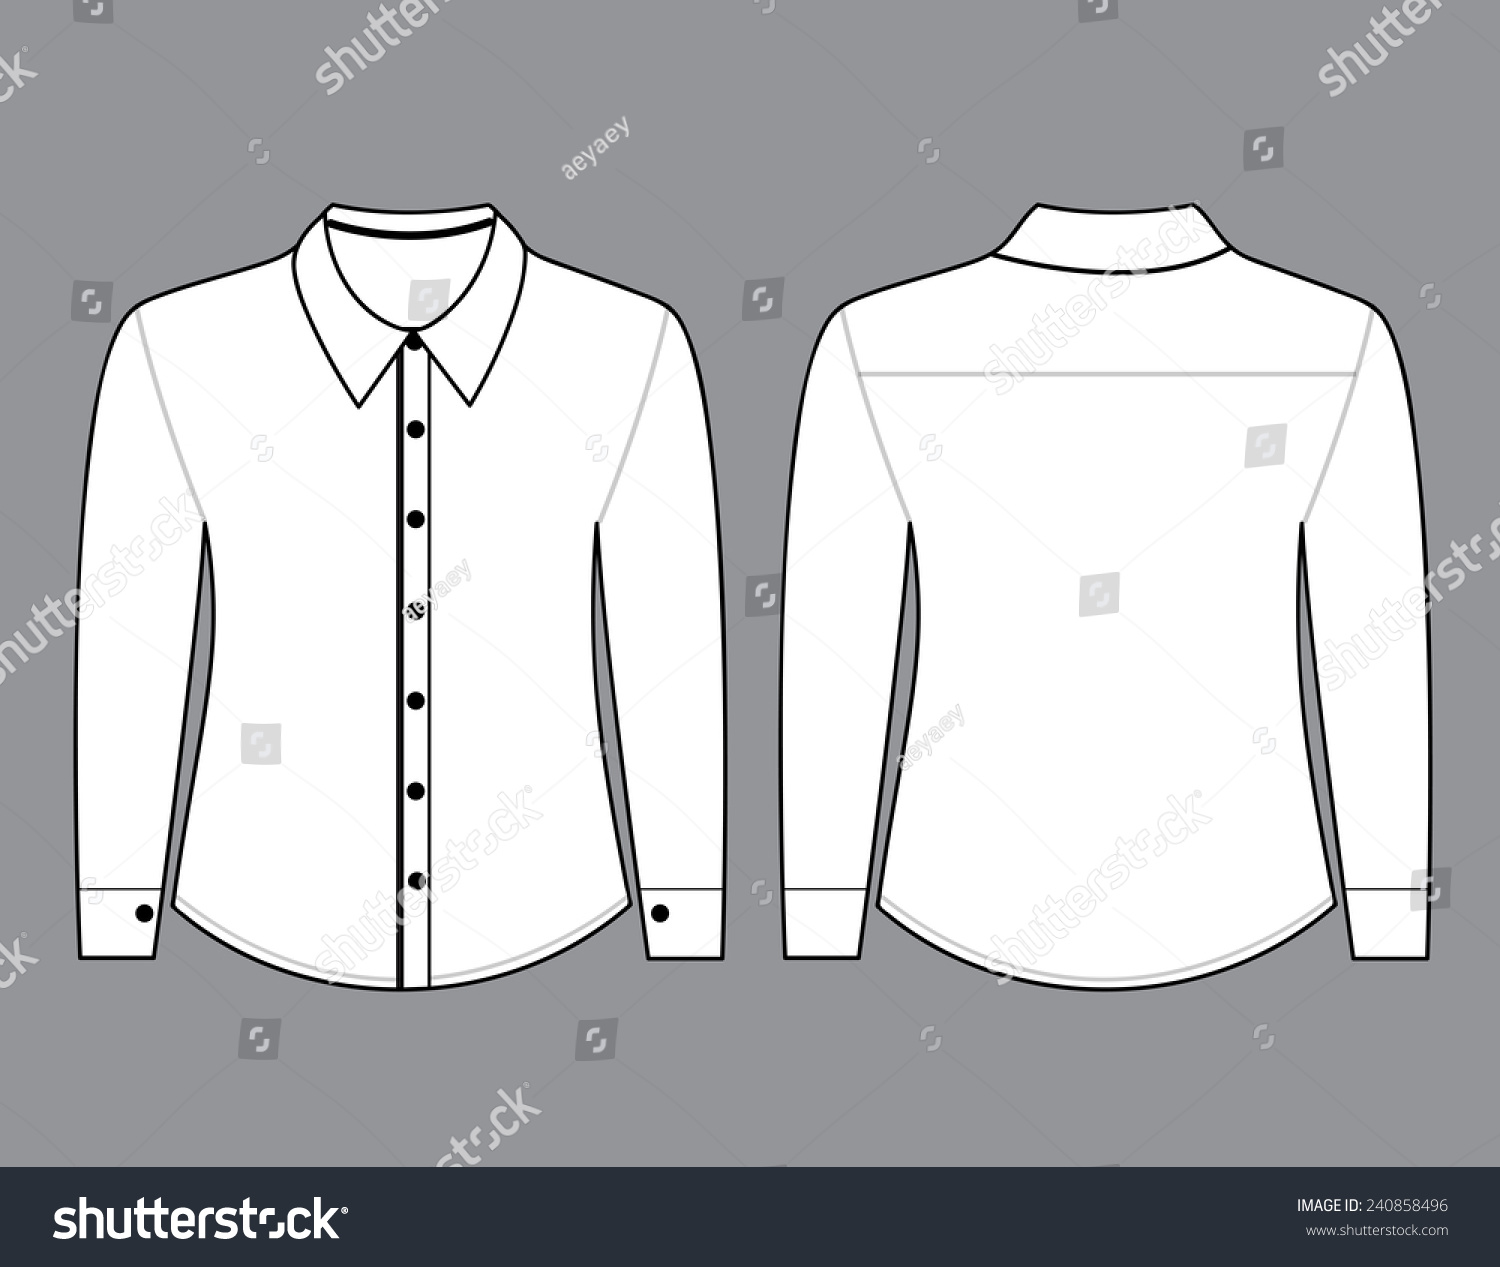 Shirt With Long Sleeves. Vector Illustration - 240858496 : Shutterstock